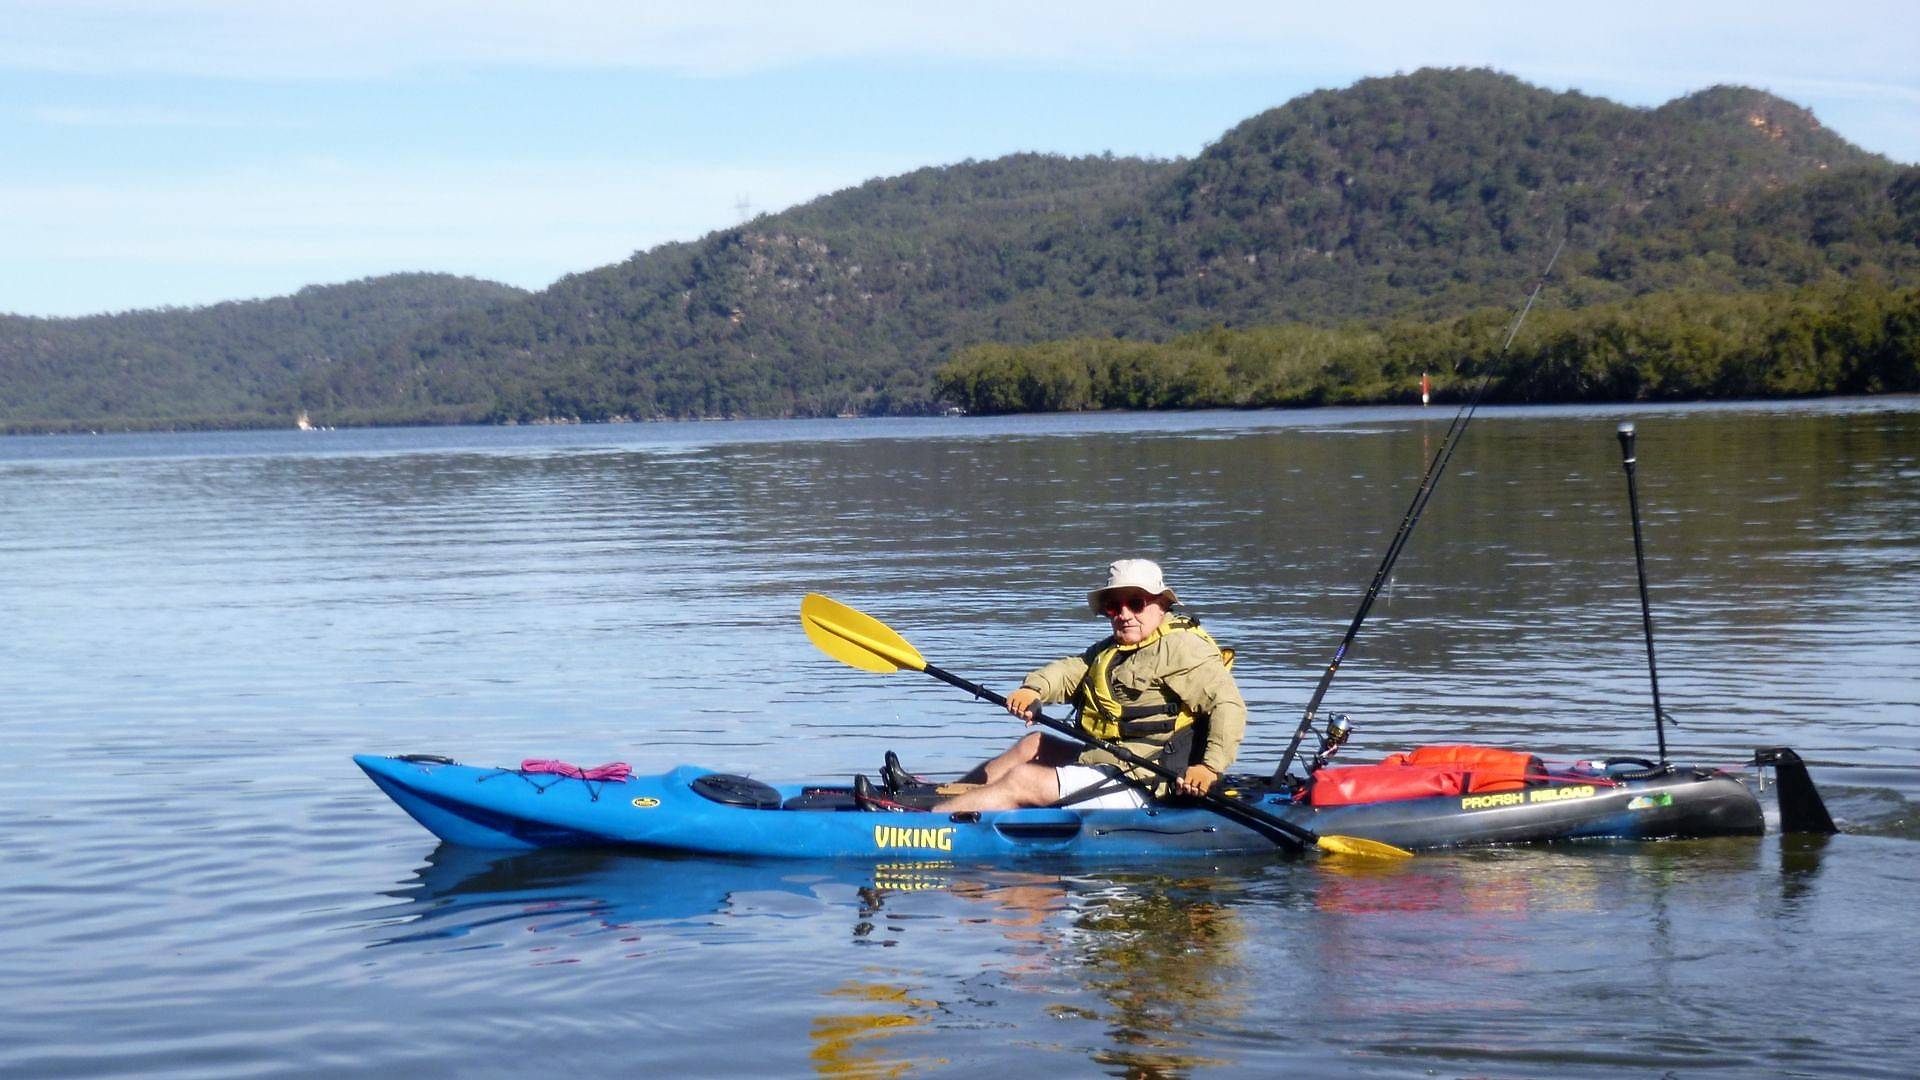 Fishing Kayaks for Sale in West Gosford store or online Australia wide